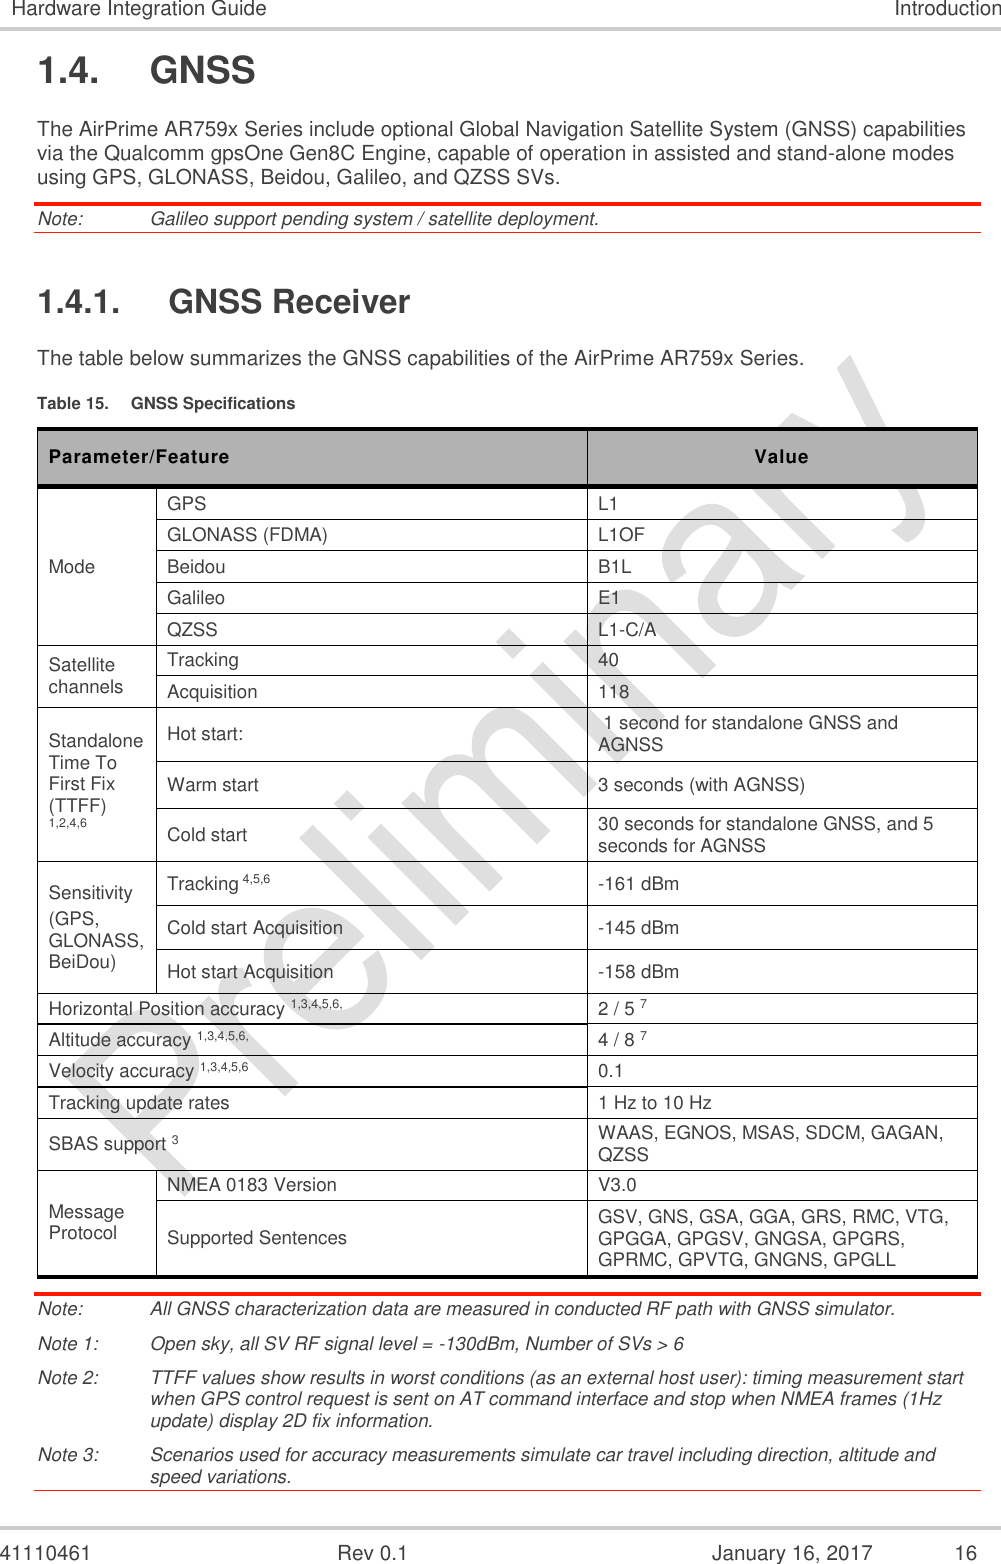  41110461  Rev 0.1  January 16, 2017  16 Hardware Integration Guide Introduction 1.4.  GNSS The AirPrime AR759x Series include optional Global Navigation Satellite System (GNSS) capabilities via the Qualcomm gpsOne Gen8C Engine, capable of operation in assisted and stand-alone modes using GPS, GLONASS, Beidou, Galileo, and QZSS SVs. Note:   Galileo support pending system / satellite deployment. 1.4.1.  GNSS Receiver The table below summarizes the GNSS capabilities of the AirPrime AR759x Series. Table 15.  GNSS Specifications Parameter/Feature Value Mode GPS L1 GLONASS (FDMA) L1OF Beidou B1L Galileo E1 QZSS L1-C/A Satellite channels Tracking 40 Acquisition 118 Standalone Time To First Fix (TTFF) 1,2,4,6 Hot start:   1 second for standalone GNSS and AGNSS Warm start 3 seconds (with AGNSS) Cold start 30 seconds for standalone GNSS, and 5 seconds for AGNSS Sensitivity (GPS, GLONASS, BeiDou) Tracking 4,5,6 -161 dBm Cold start Acquisition -145 dBm Hot start Acquisition -158 dBm Horizontal Position accuracy 1,3,4,5,6, 2 / 5 7 Altitude accuracy 1,3,4,5,6, 4 / 8 7 Velocity accuracy 1,3,4,5,6 0.1 Tracking update rates 1 Hz to 10 Hz SBAS support 3 WAAS, EGNOS, MSAS, SDCM, GAGAN, QZSS Message Protocol NMEA 0183 Version V3.0 Supported Sentences GSV, GNS, GSA, GGA, GRS, RMC, VTG, GPGGA, GPGSV, GNGSA, GPGRS, GPRMC, GPVTG, GNGNS, GPGLL Note:   All GNSS characterization data are measured in conducted RF path with GNSS simulator. Note 1:  Open sky, all SV RF signal level = -130dBm, Number of SVs &gt; 6 Note 2:  TTFF values show results in worst conditions (as an external host user): timing measurement start when GPS control request is sent on AT command interface and stop when NMEA frames (1Hz update) display 2D fix information. Note 3:  Scenarios used for accuracy measurements simulate car travel including direction, altitude and speed variations. 